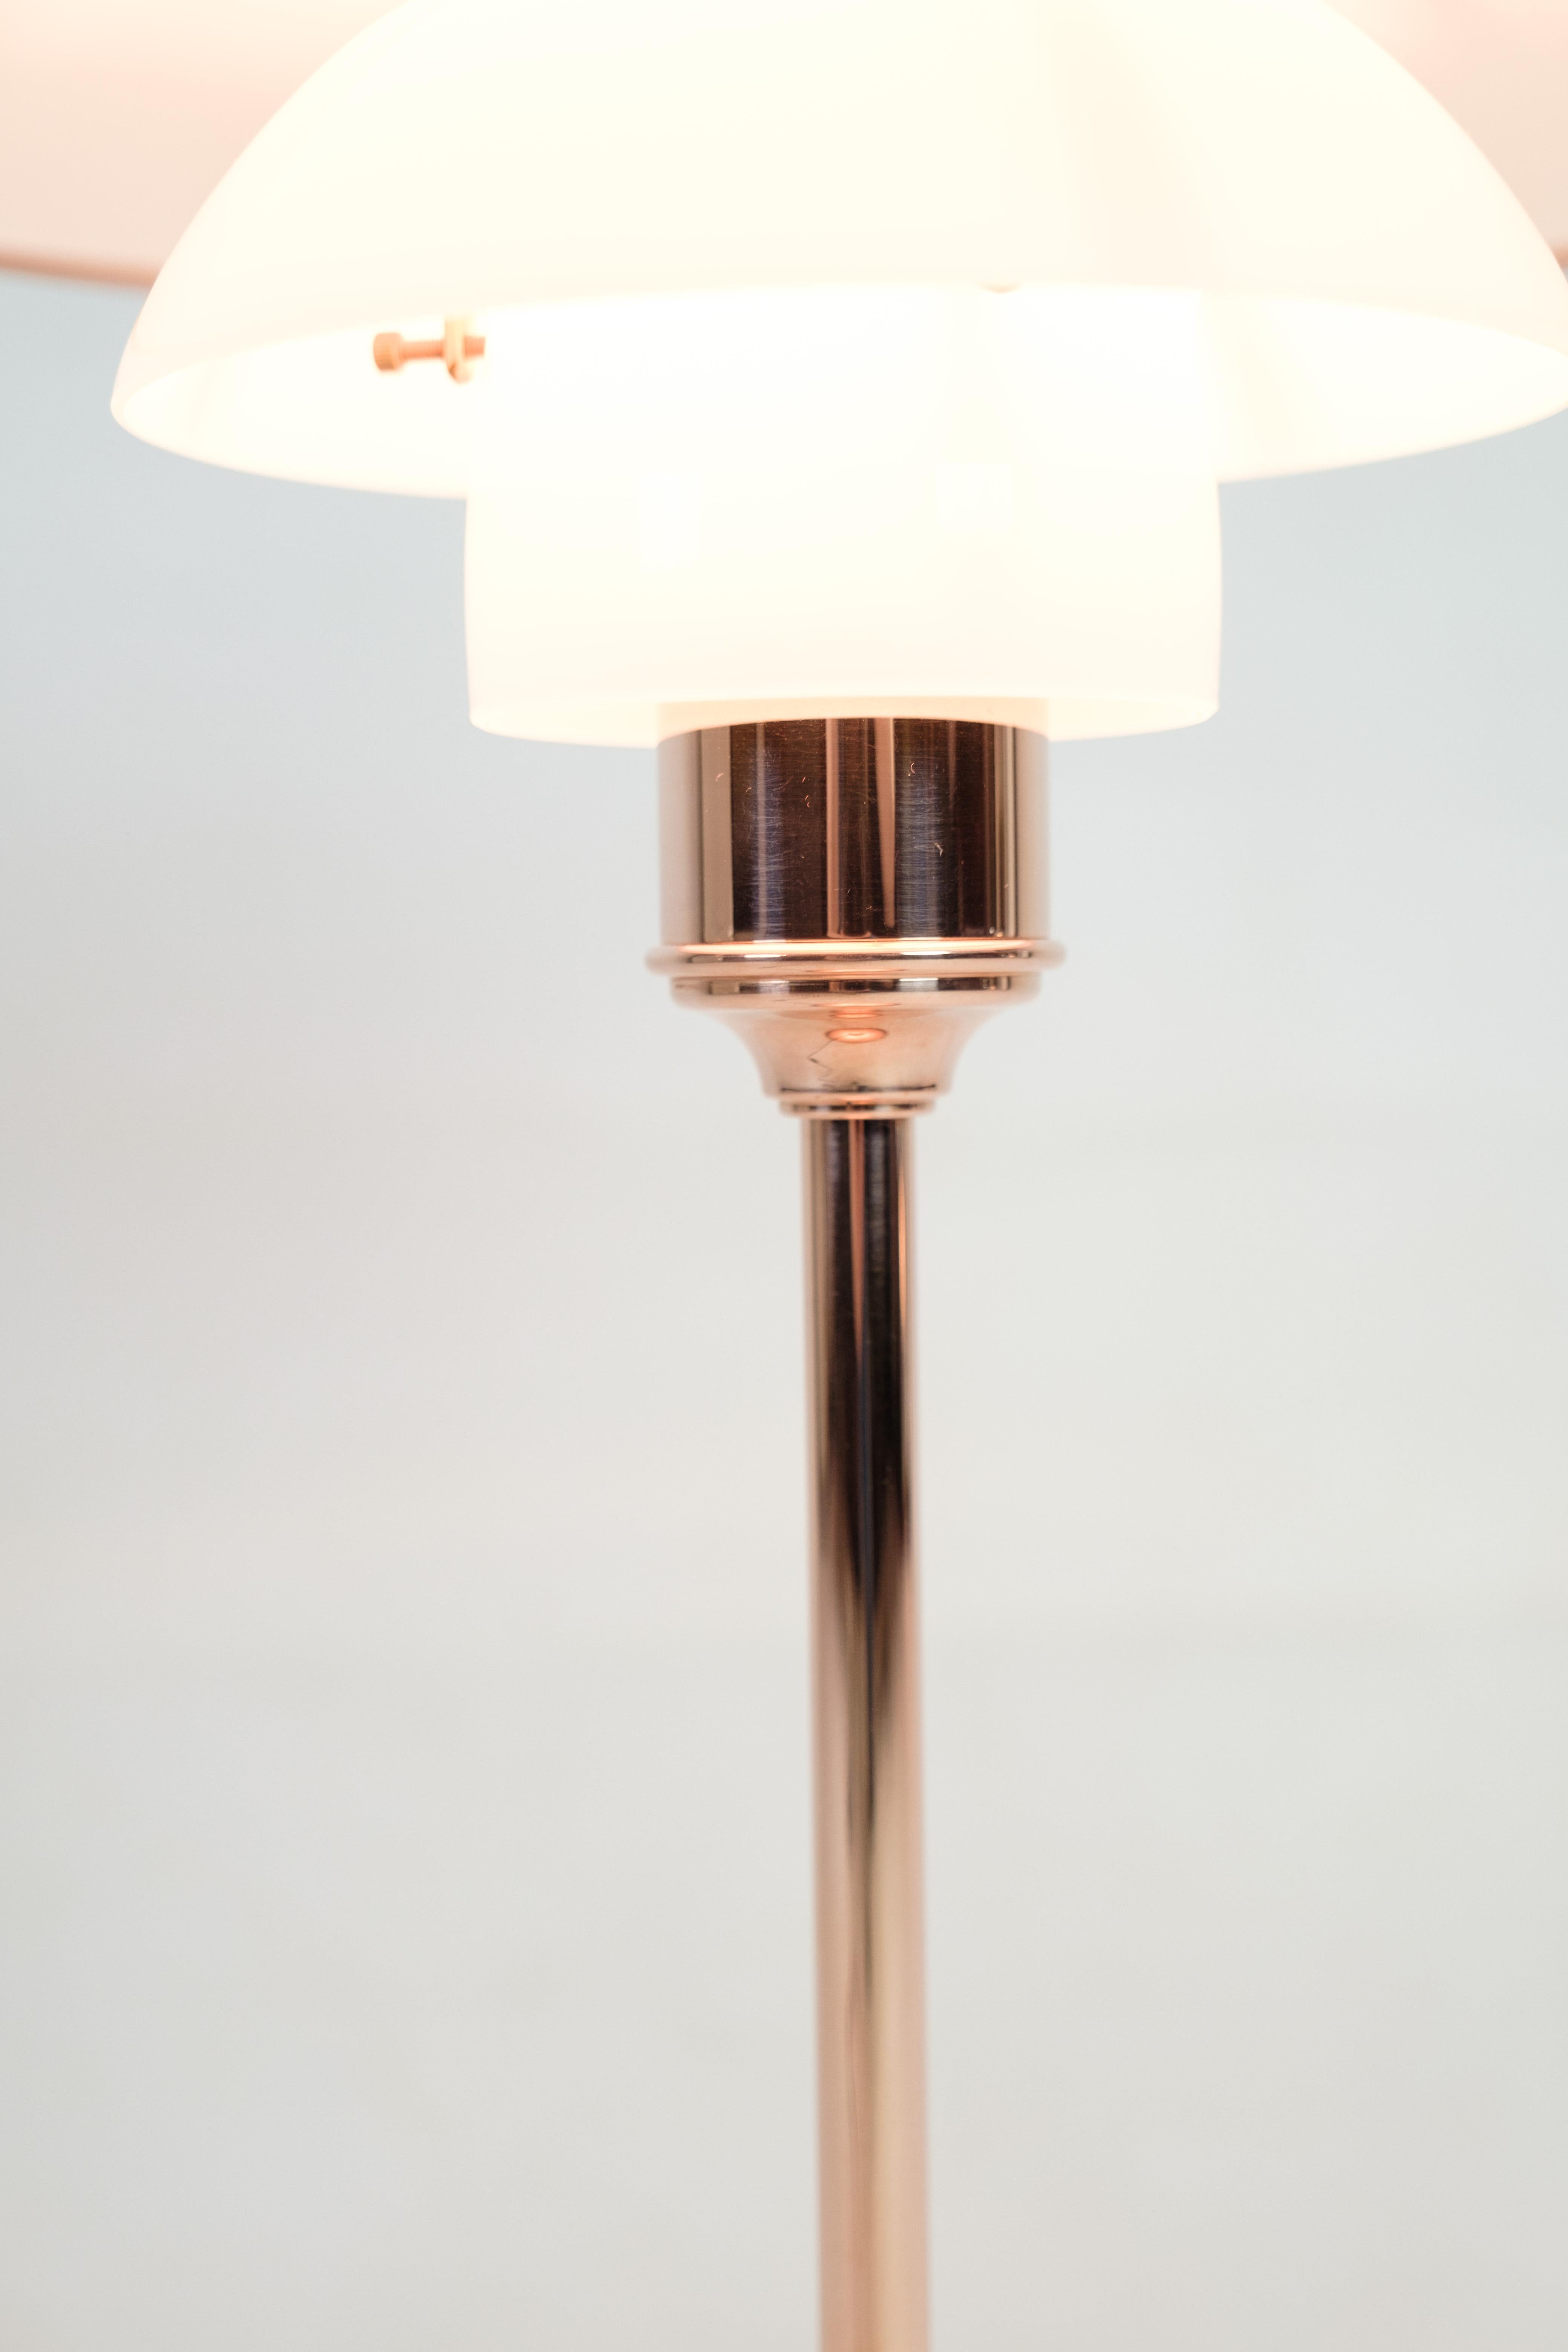 PH Table Lamp, Model Ph3½-2½, Limited Edition, Poul Henningsen, Louis Poulsen In Excellent Condition For Sale In Lejre, DK